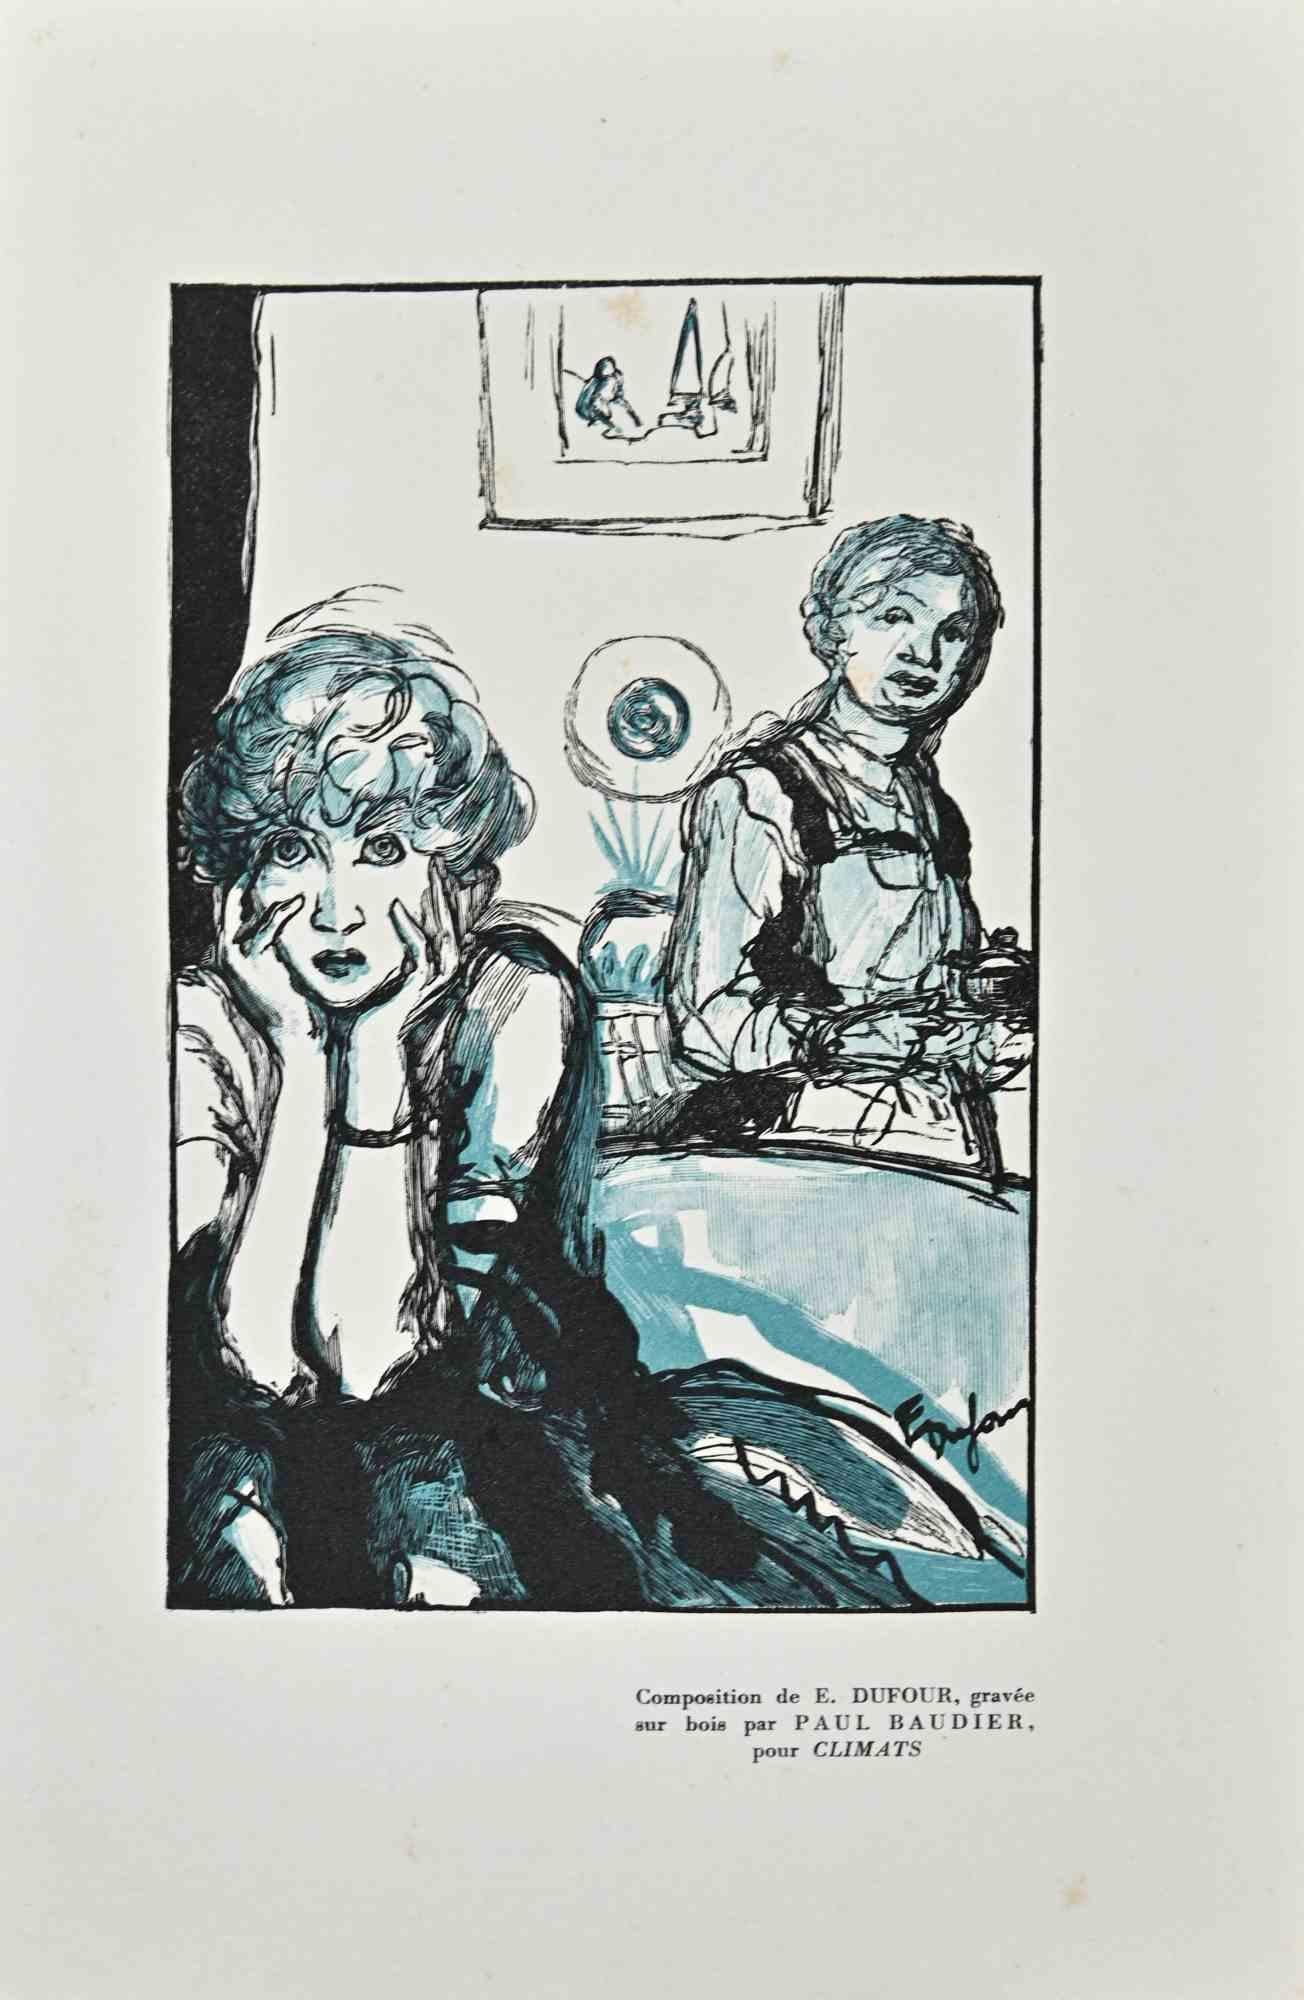 Womanly Preoccupation is an original woodcut print on ivory-colored paper realized by Paul Baudier (1881-1962) in the 1930s.

On the lower right description in French.

Very good conditions.

Paul Baudier, (born October 18, 1881 in Paris and died